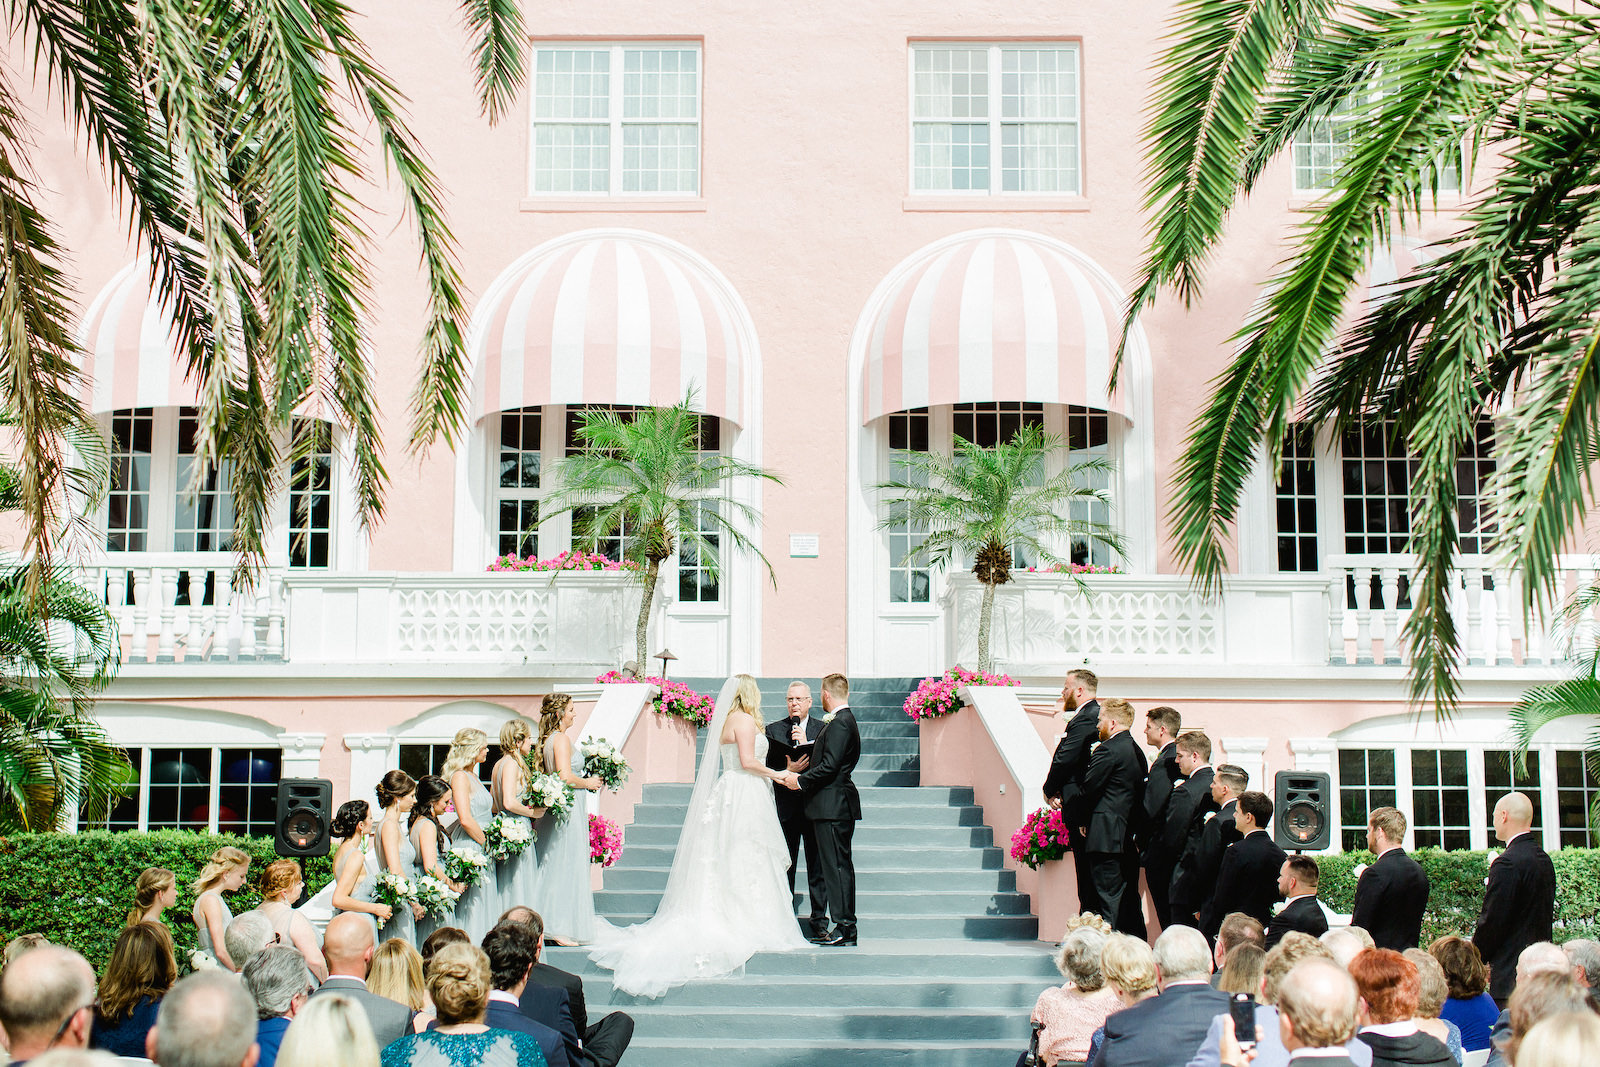 Staircase Wedding Ceremony | Dusty Blue Grey Tulle Bridesmaid Dresses | St Pete Beach Wedding Venue The Don Cesar | Classic Greenery White Flowers Bouquets | Groom Groomsmen Wearing Classic Black Suit Tux